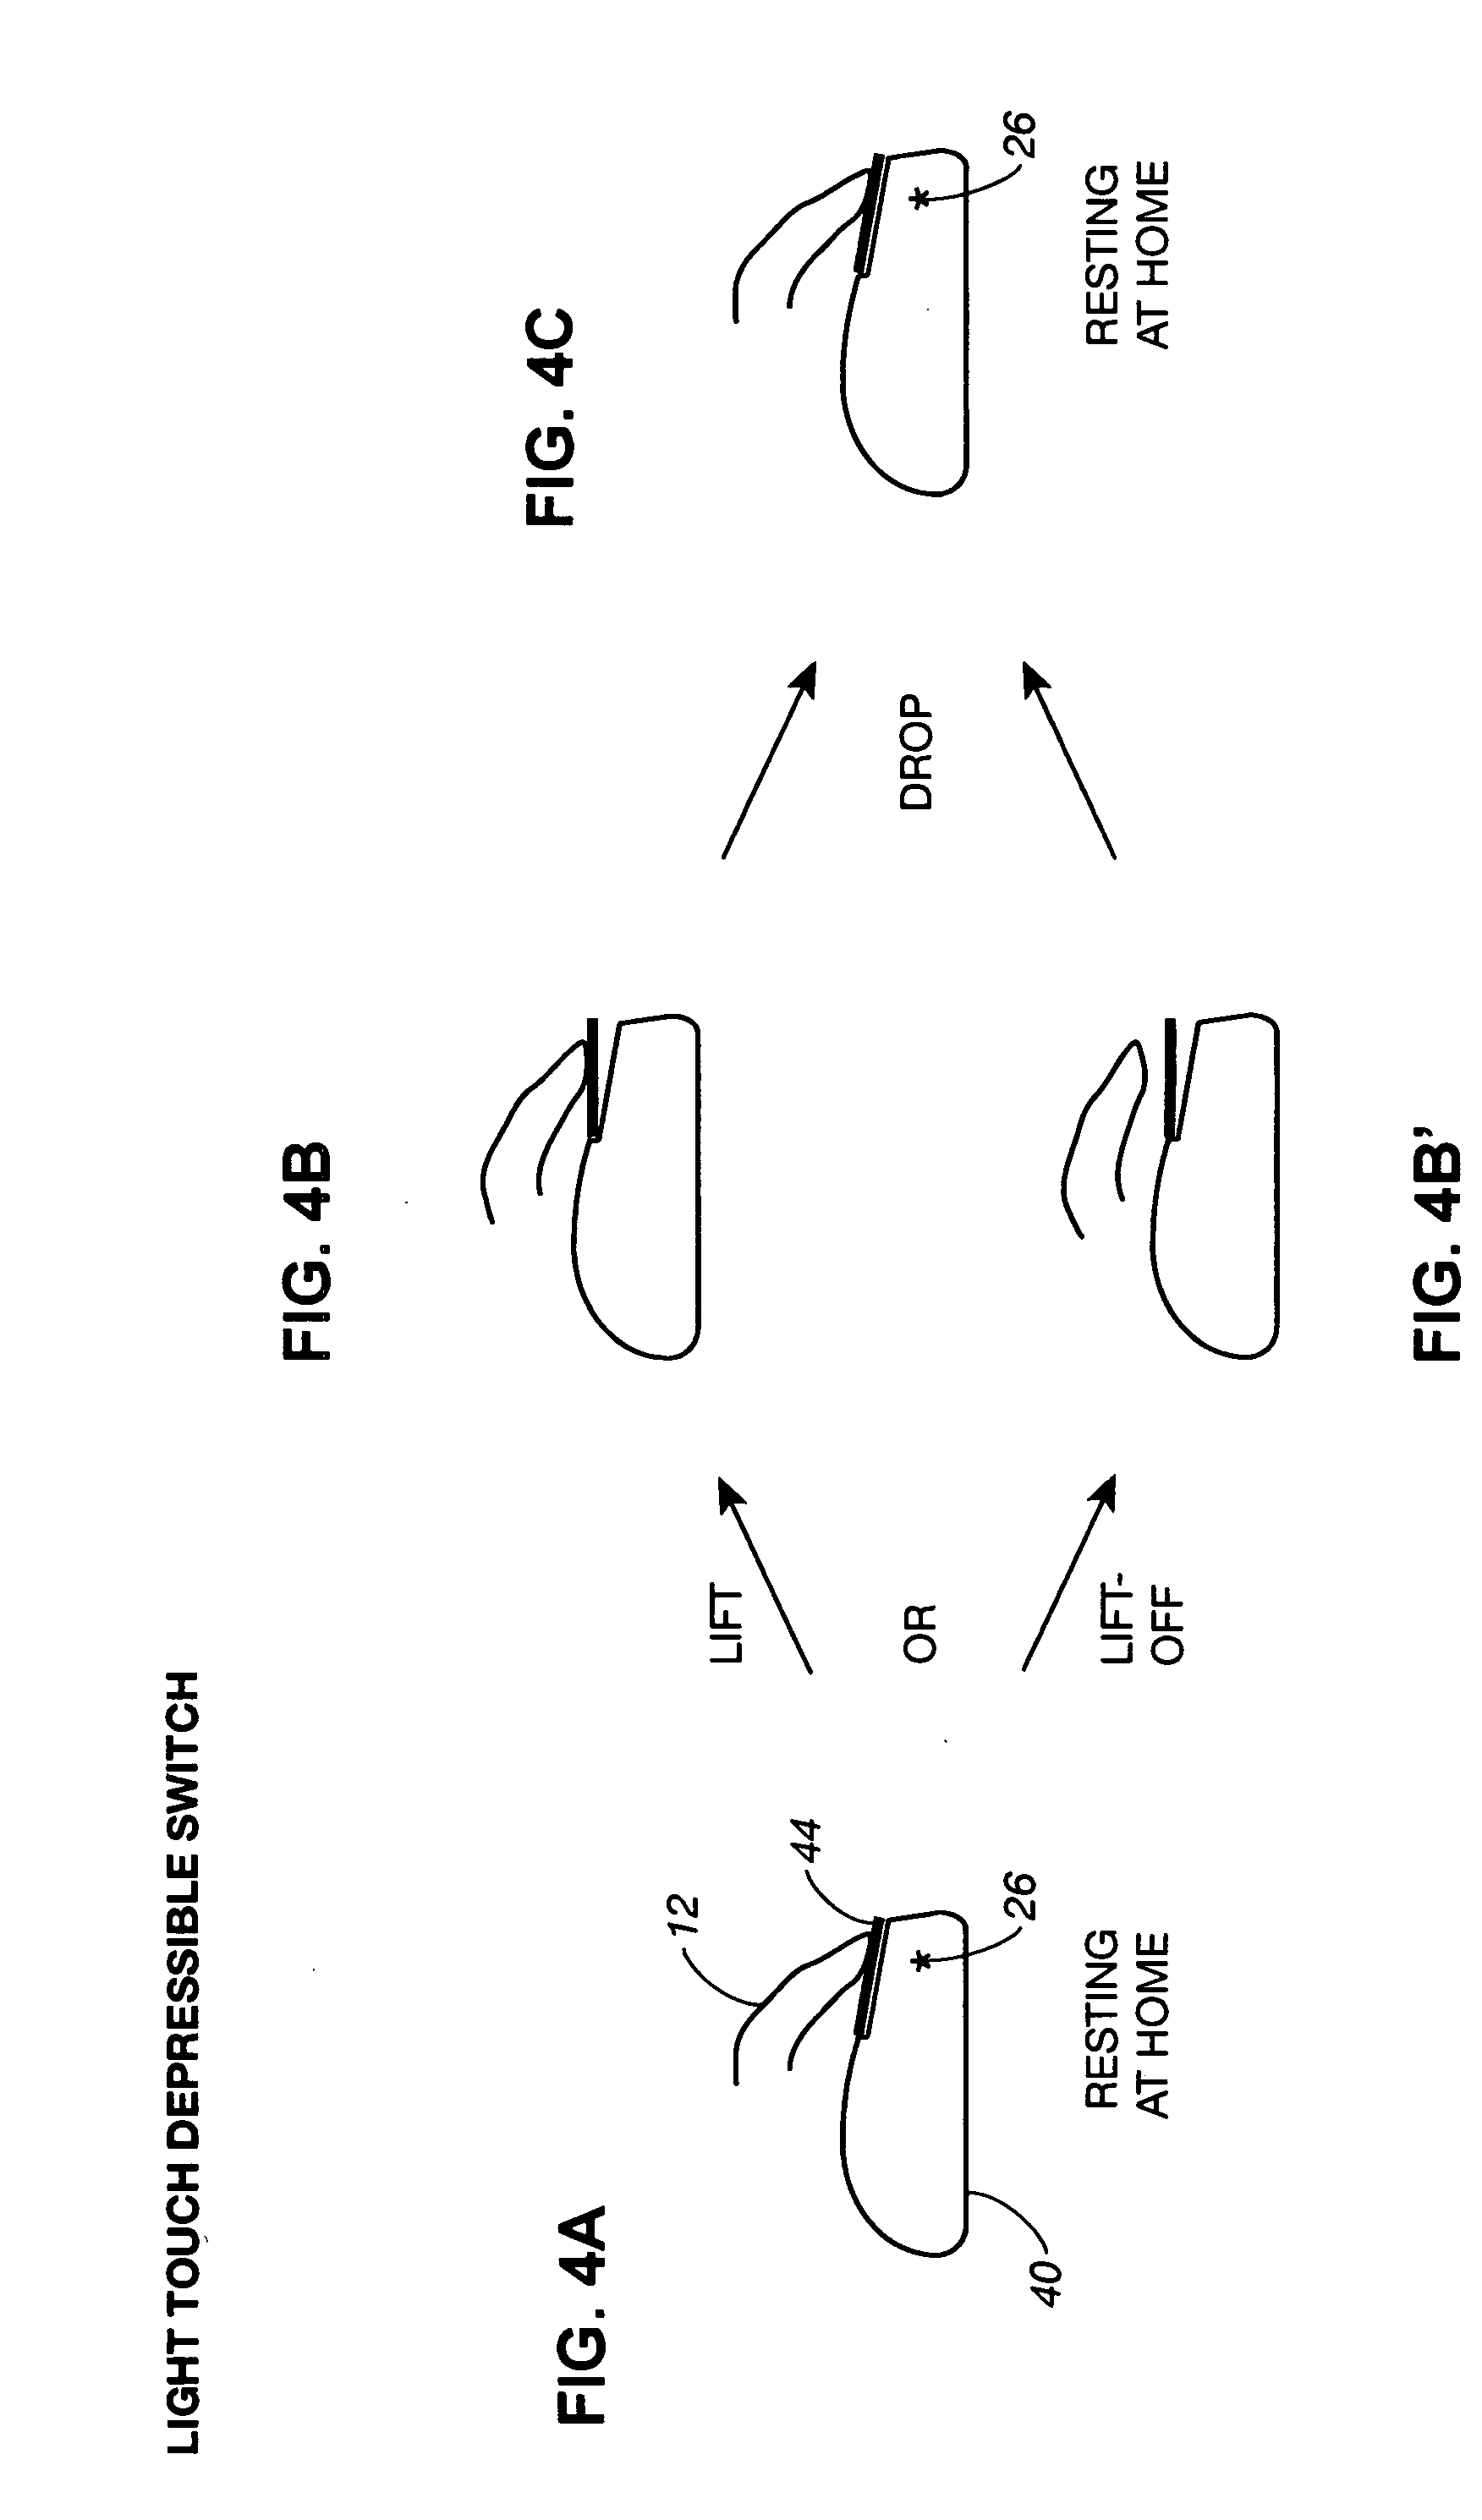 Ergonomic lift-clicking method and apparatus for actuating home switches on computer input devices